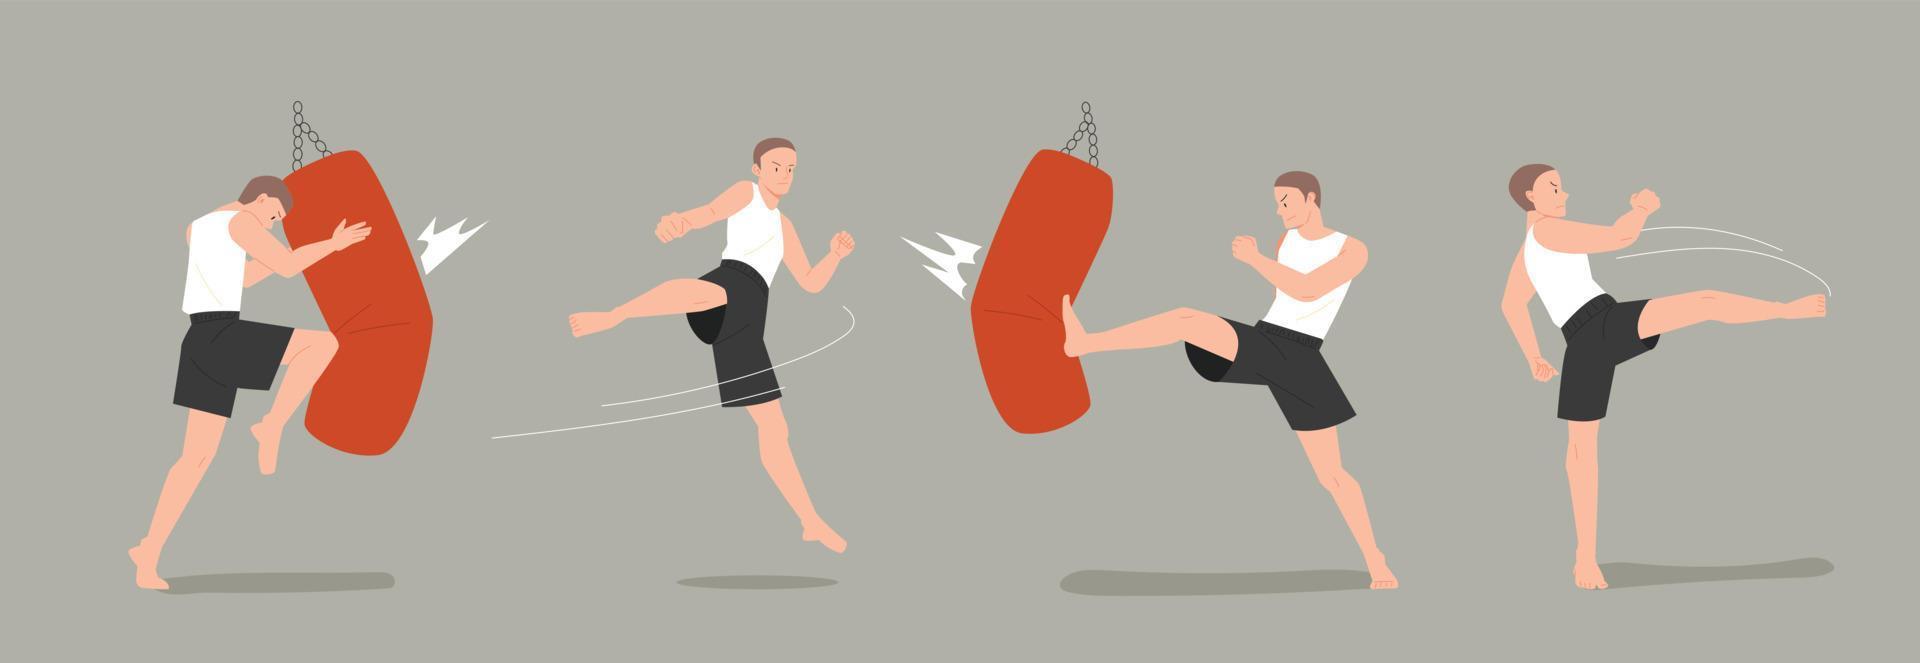 Various movements of kickboxers training in the gym. flat design style vector illustration.